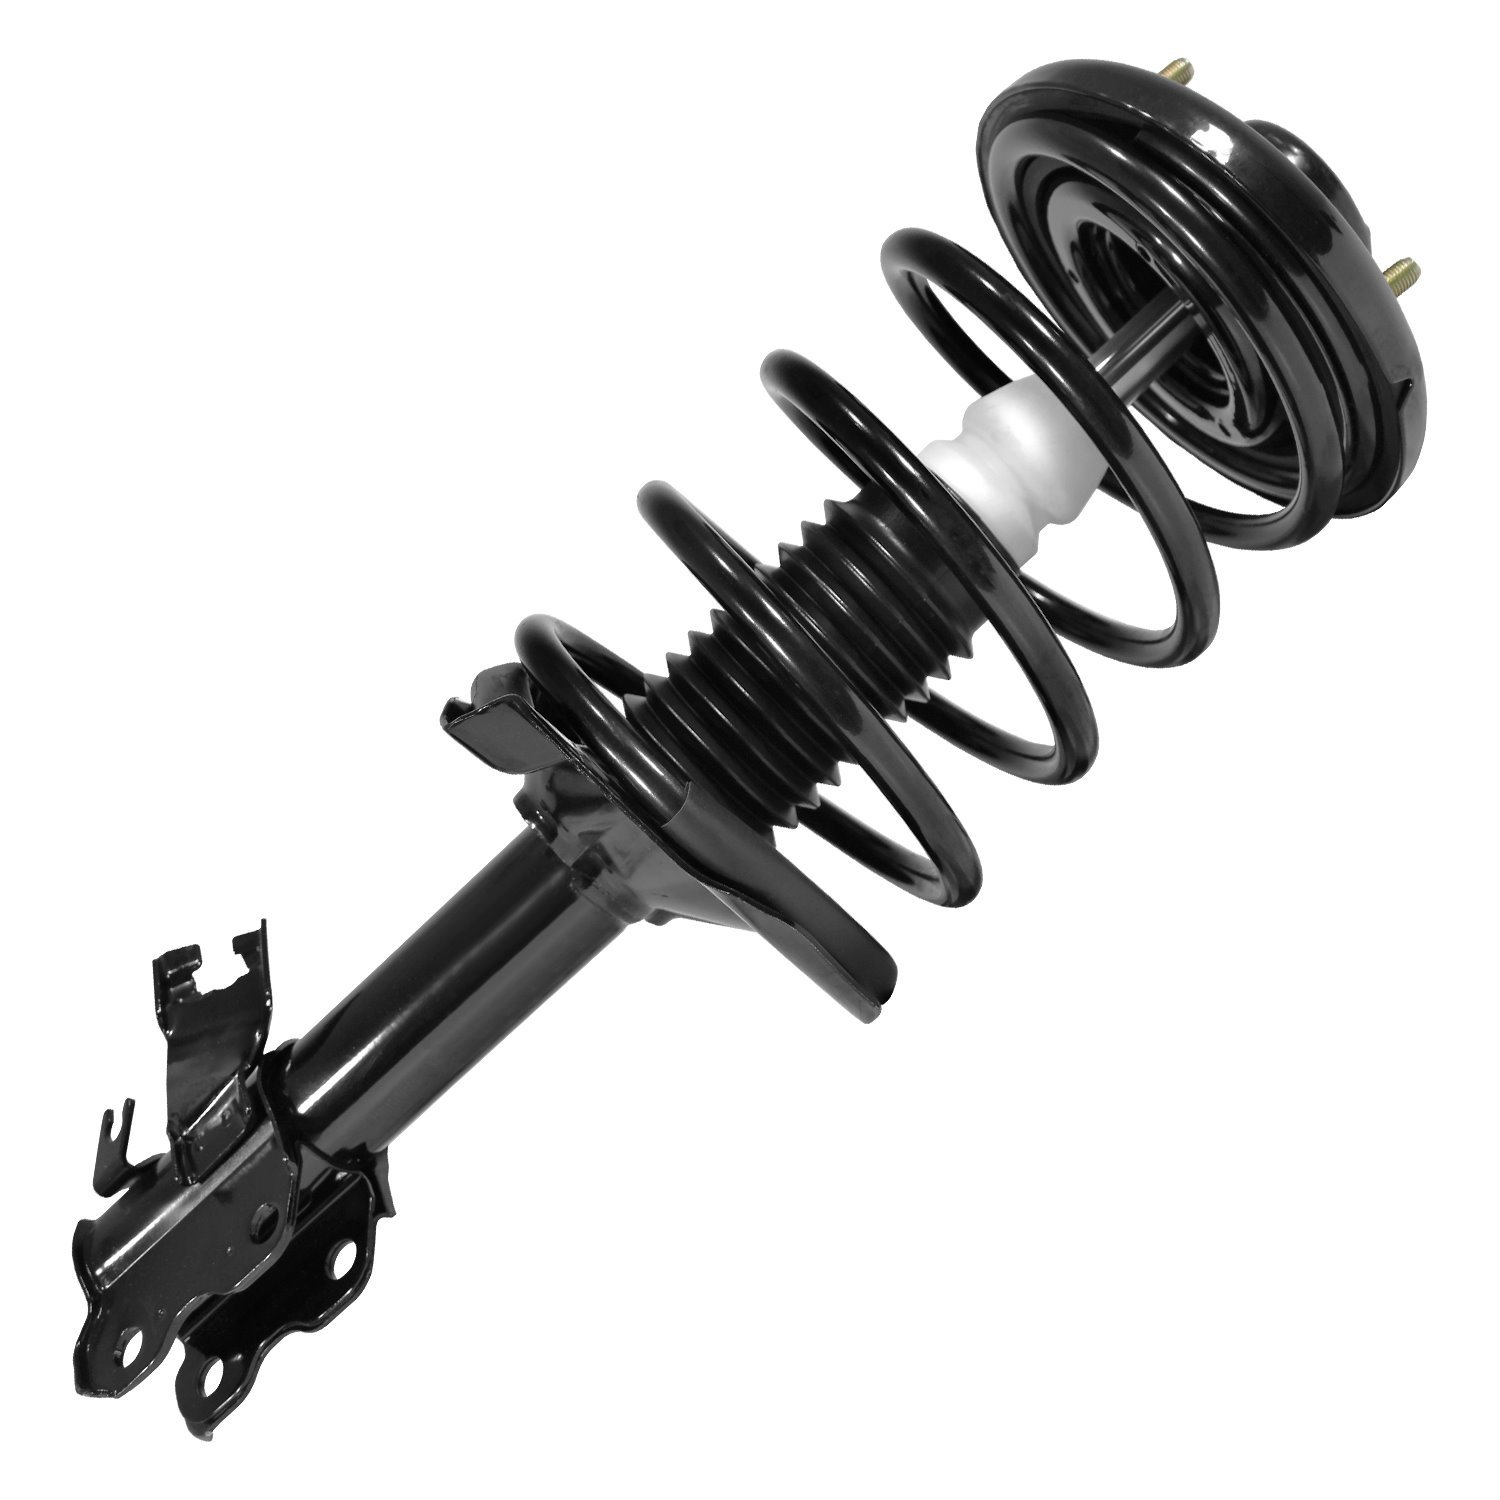 11943 Suspension Strut & Coil Spring Assembly Fits Select Nissan Maxima, Infiniti I35